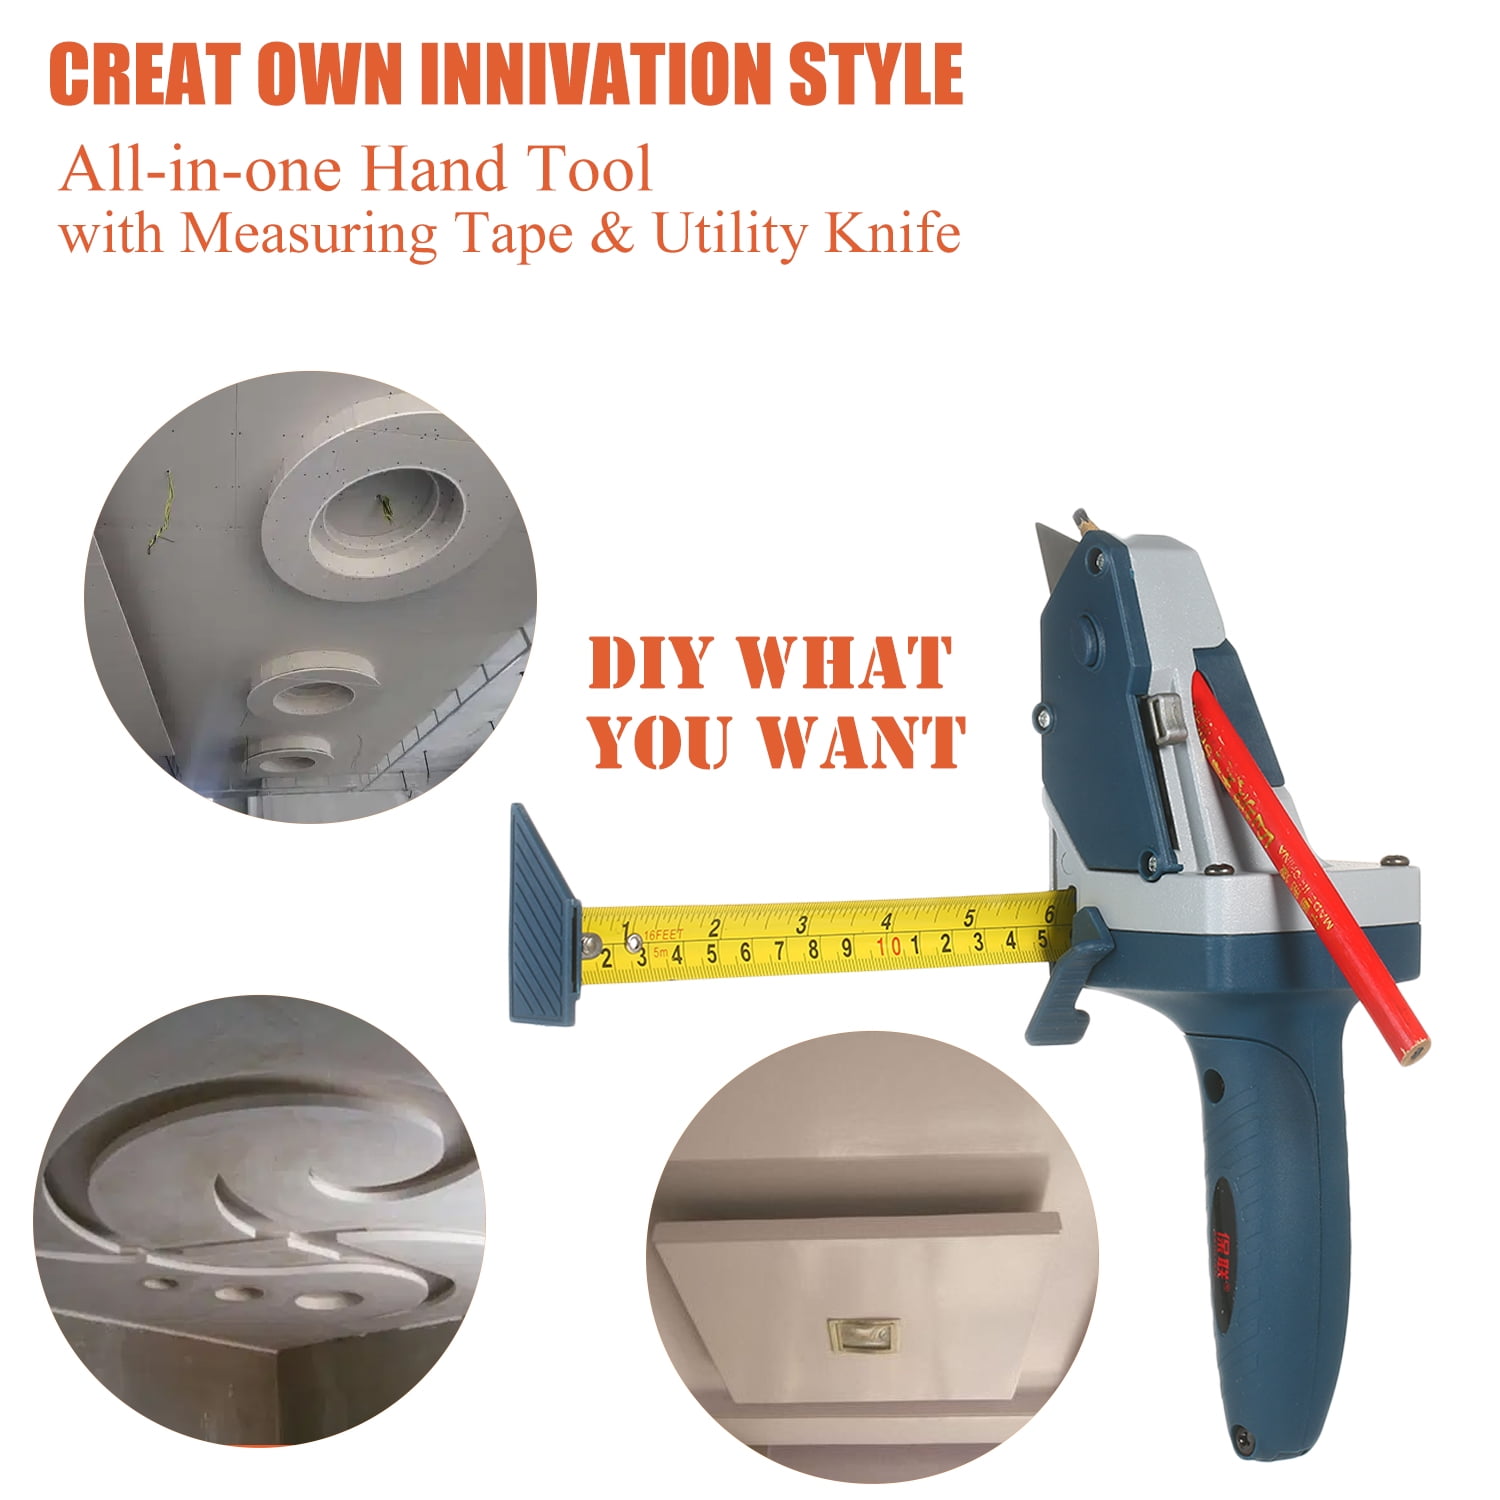 Ideal for Shingles/Insulation/Tile/Carpet/Foam Beher All-in-one Hand Tool with Measuring Tape and Utility Knife Mark and Cut Drywall Measure and Mark Wood for Rip Cuts Measure 